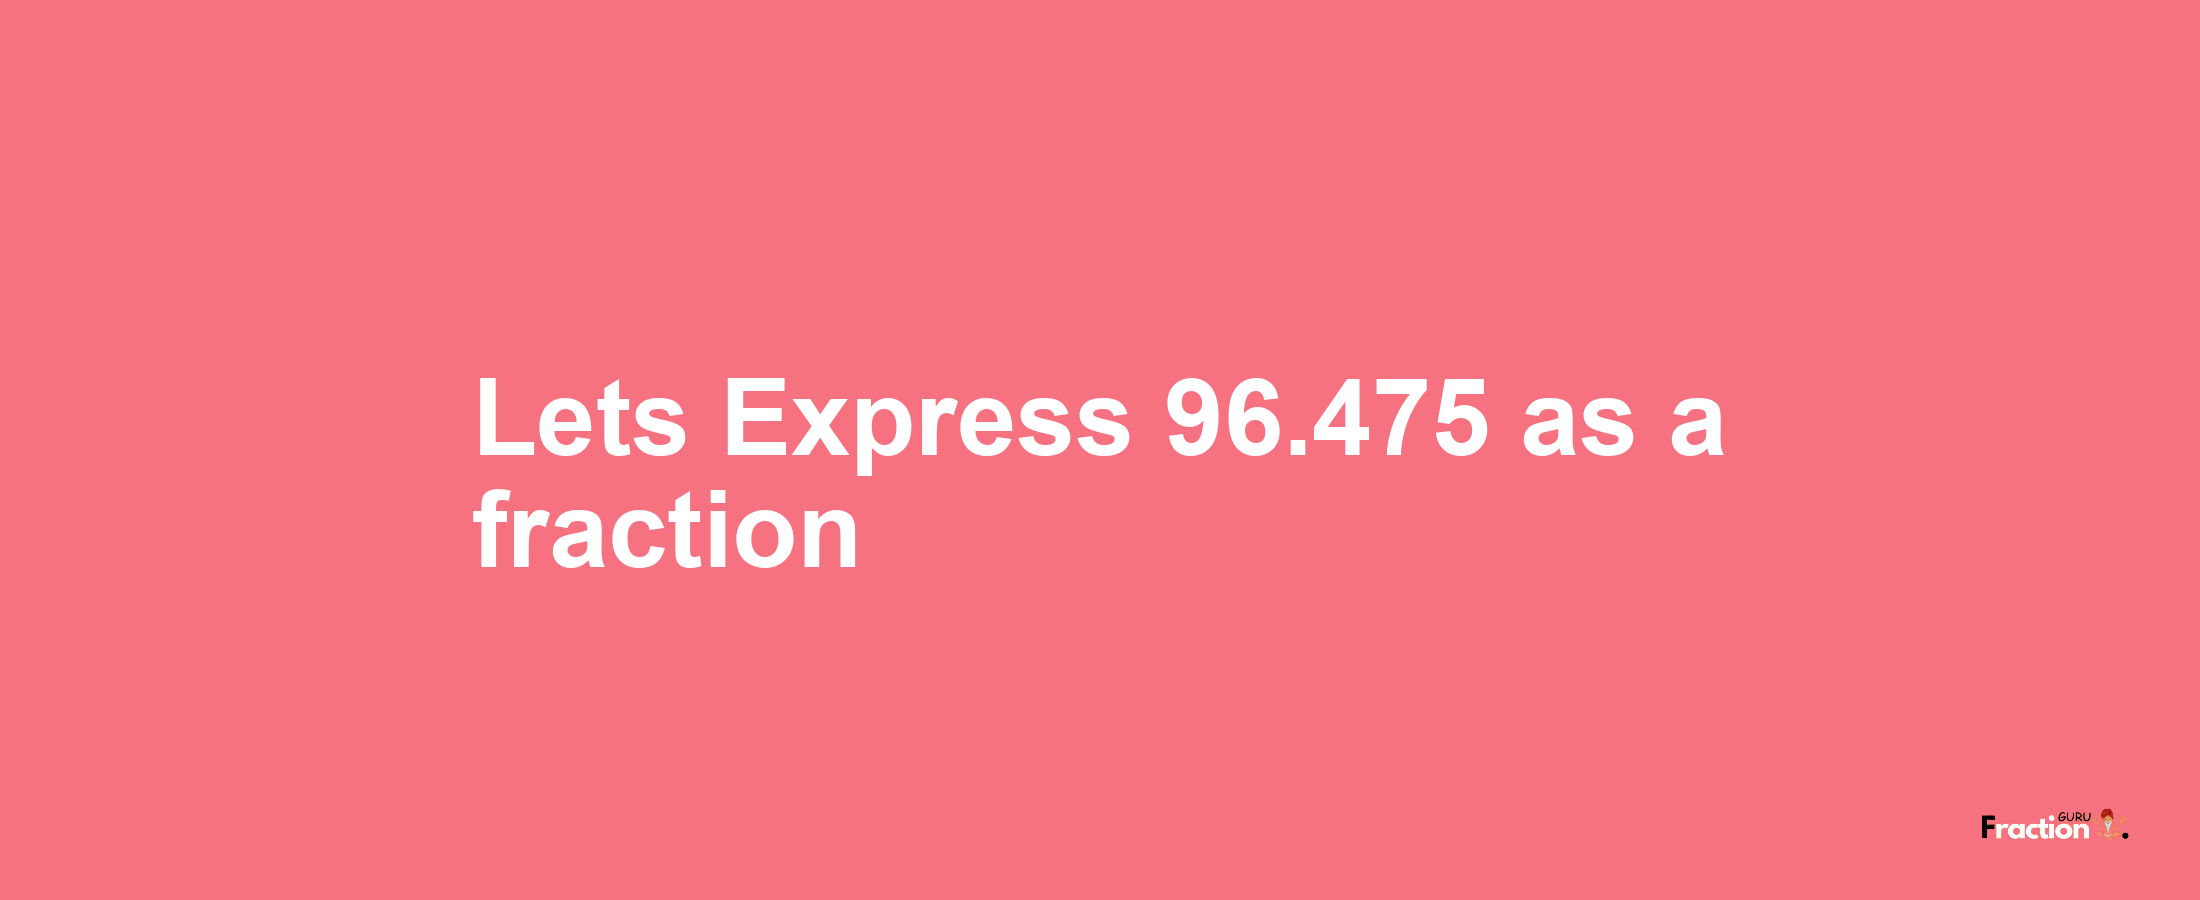 Lets Express 96.475 as afraction